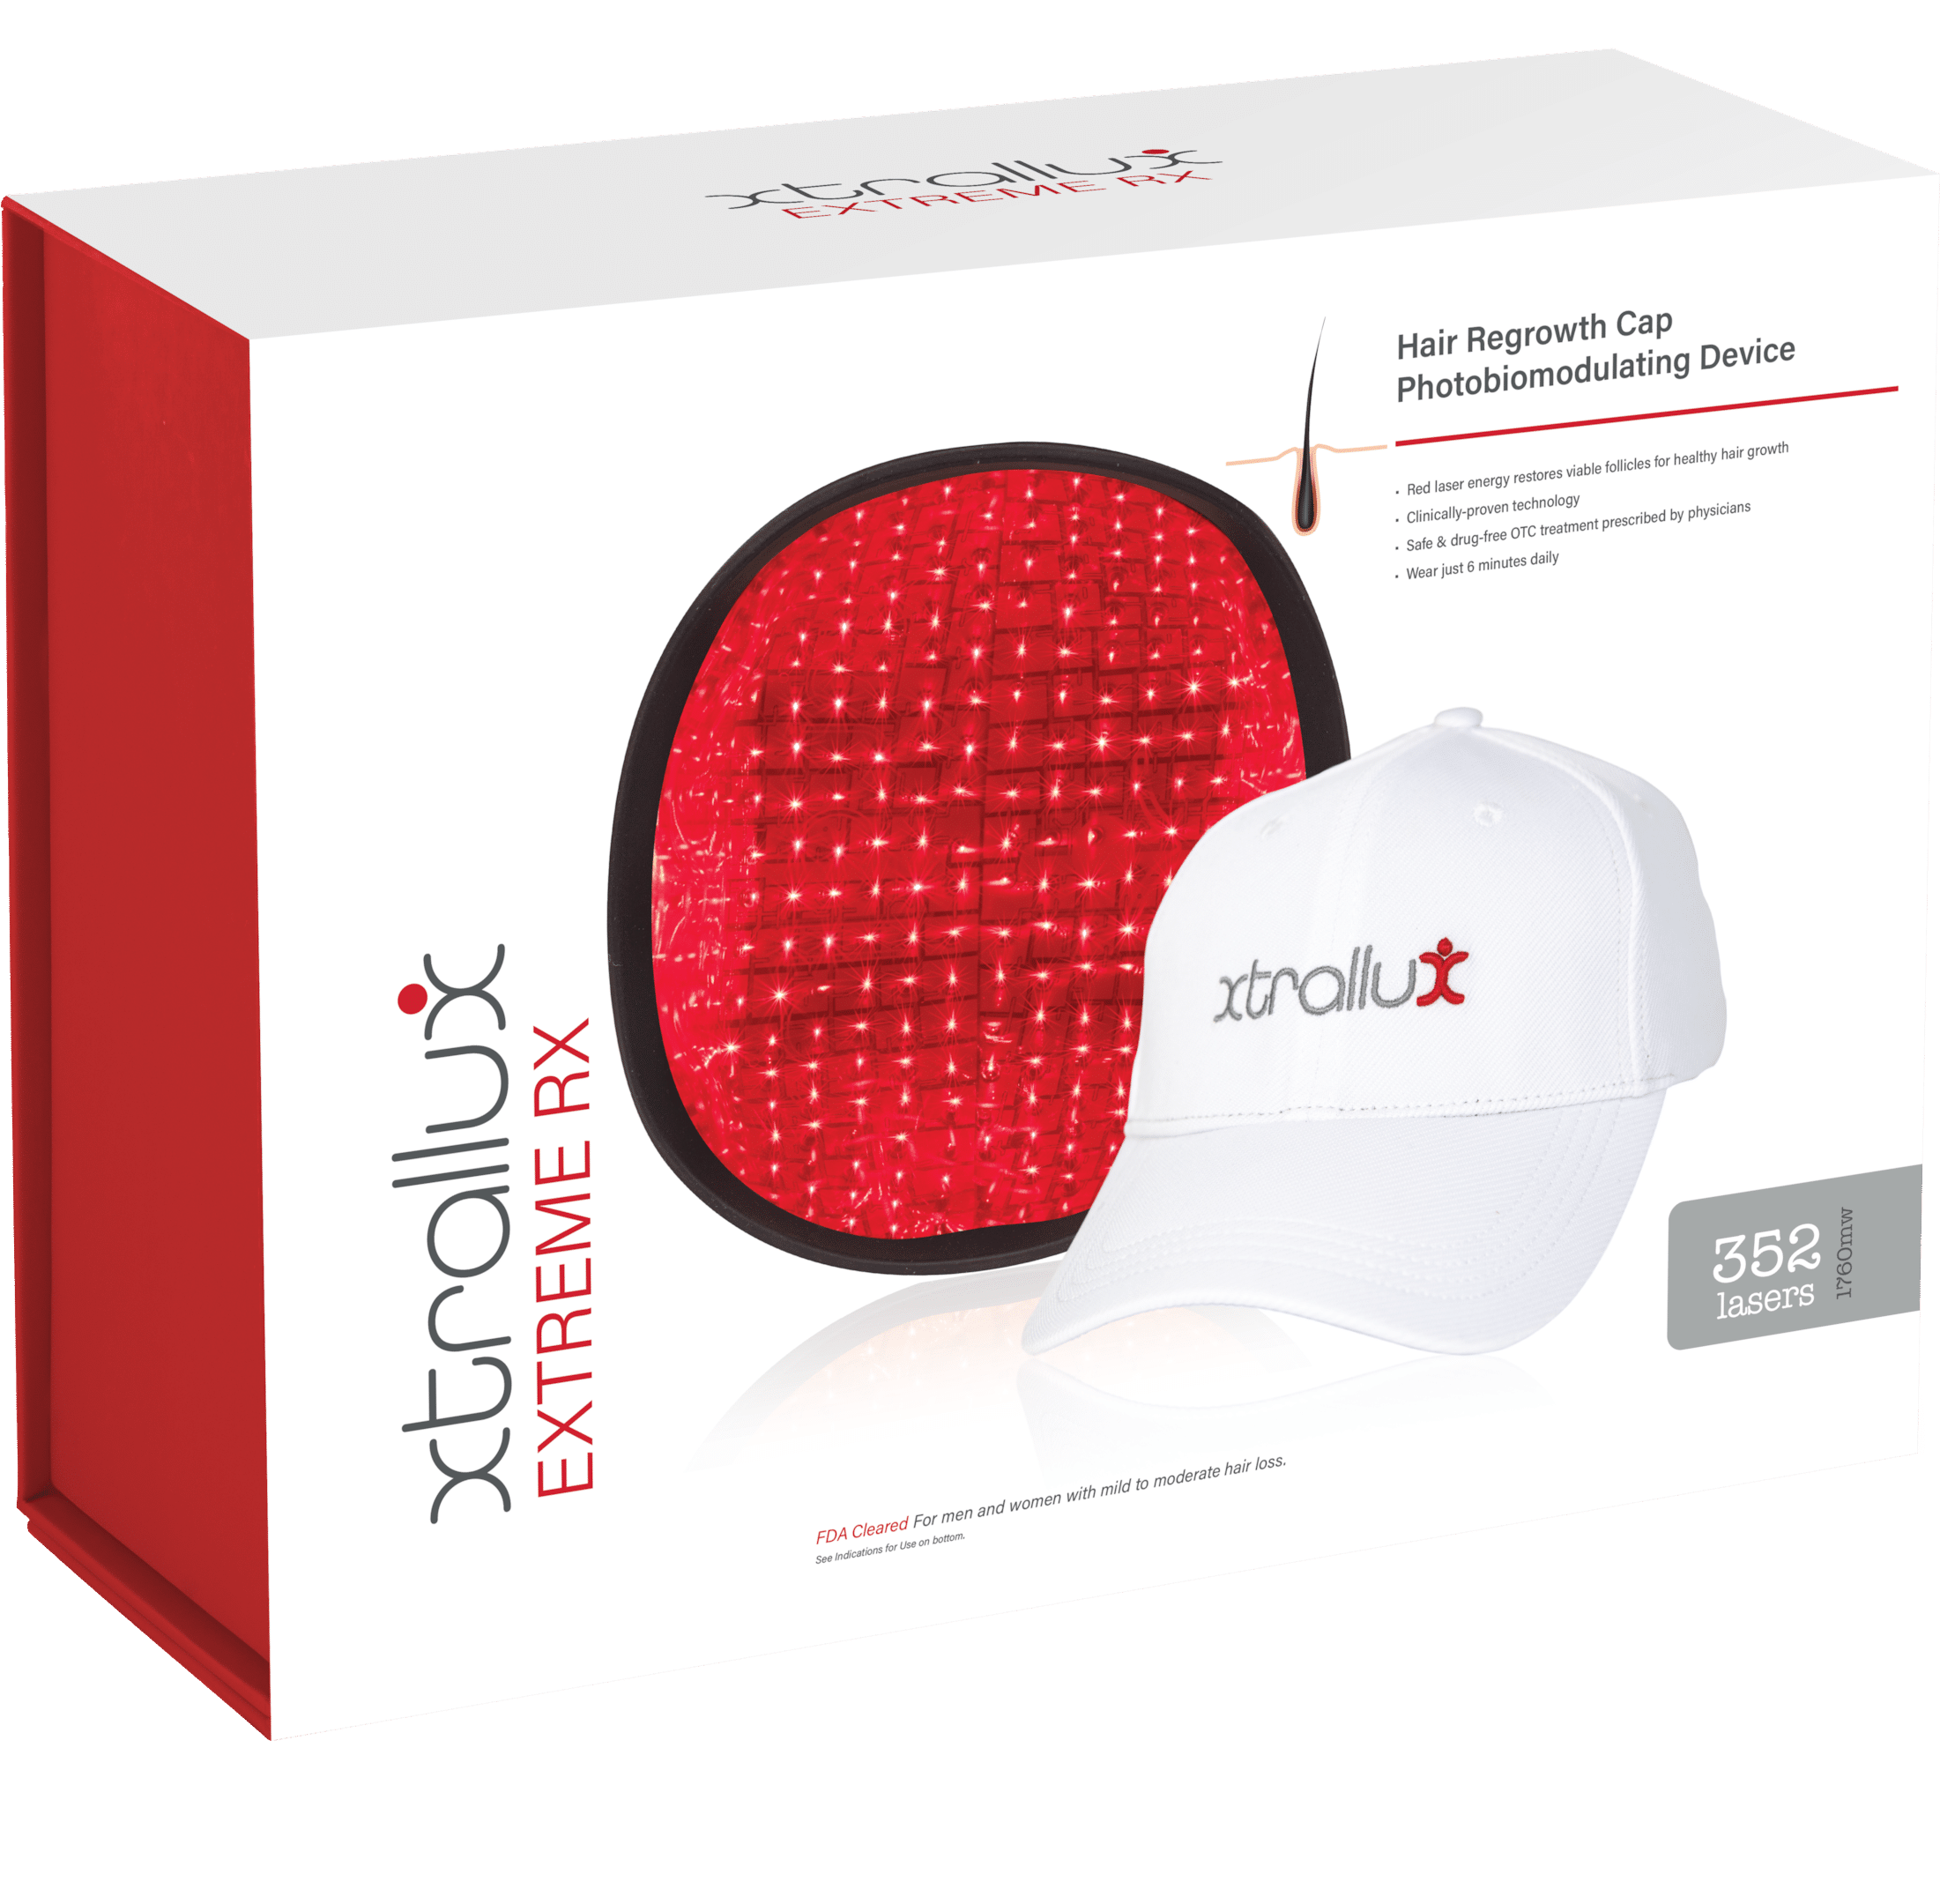 Xtrallux Extreme RX 352 laser cap to treat active hair loss